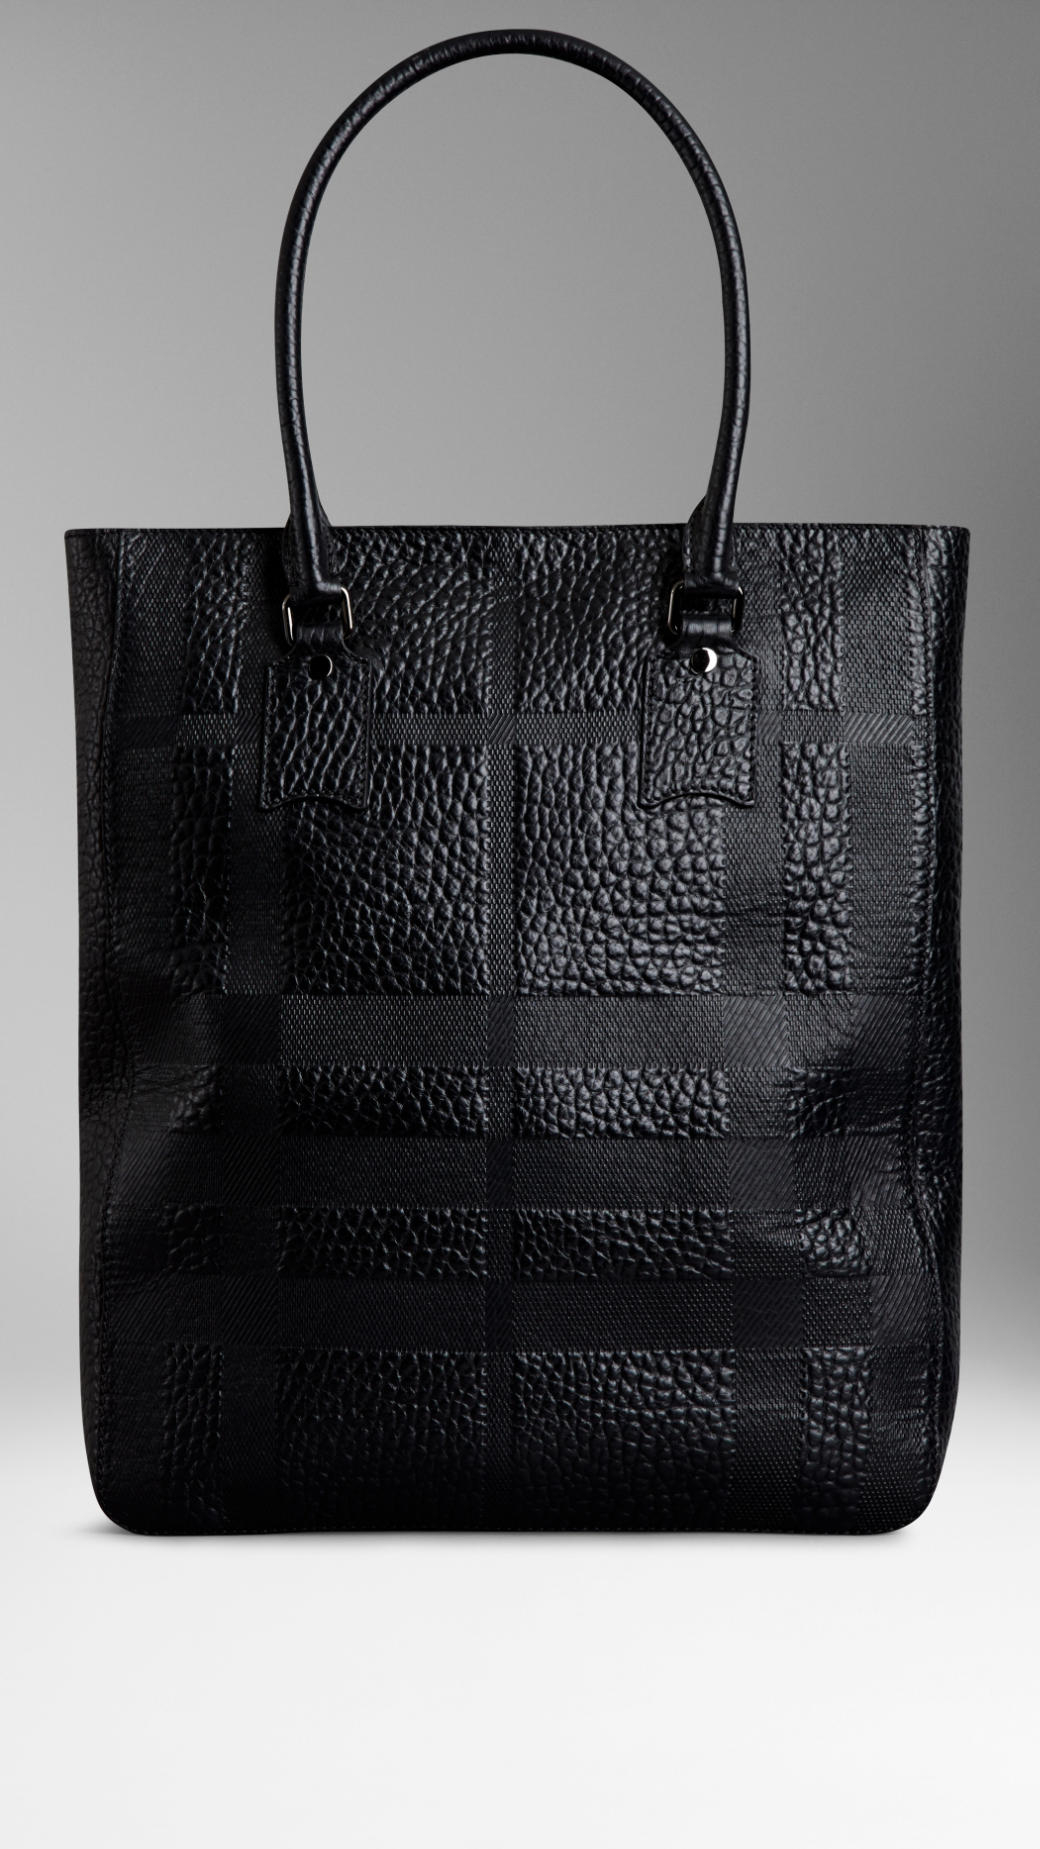 Burberry Embossed Check Leather Tote Bag in Black for Men - Lyst